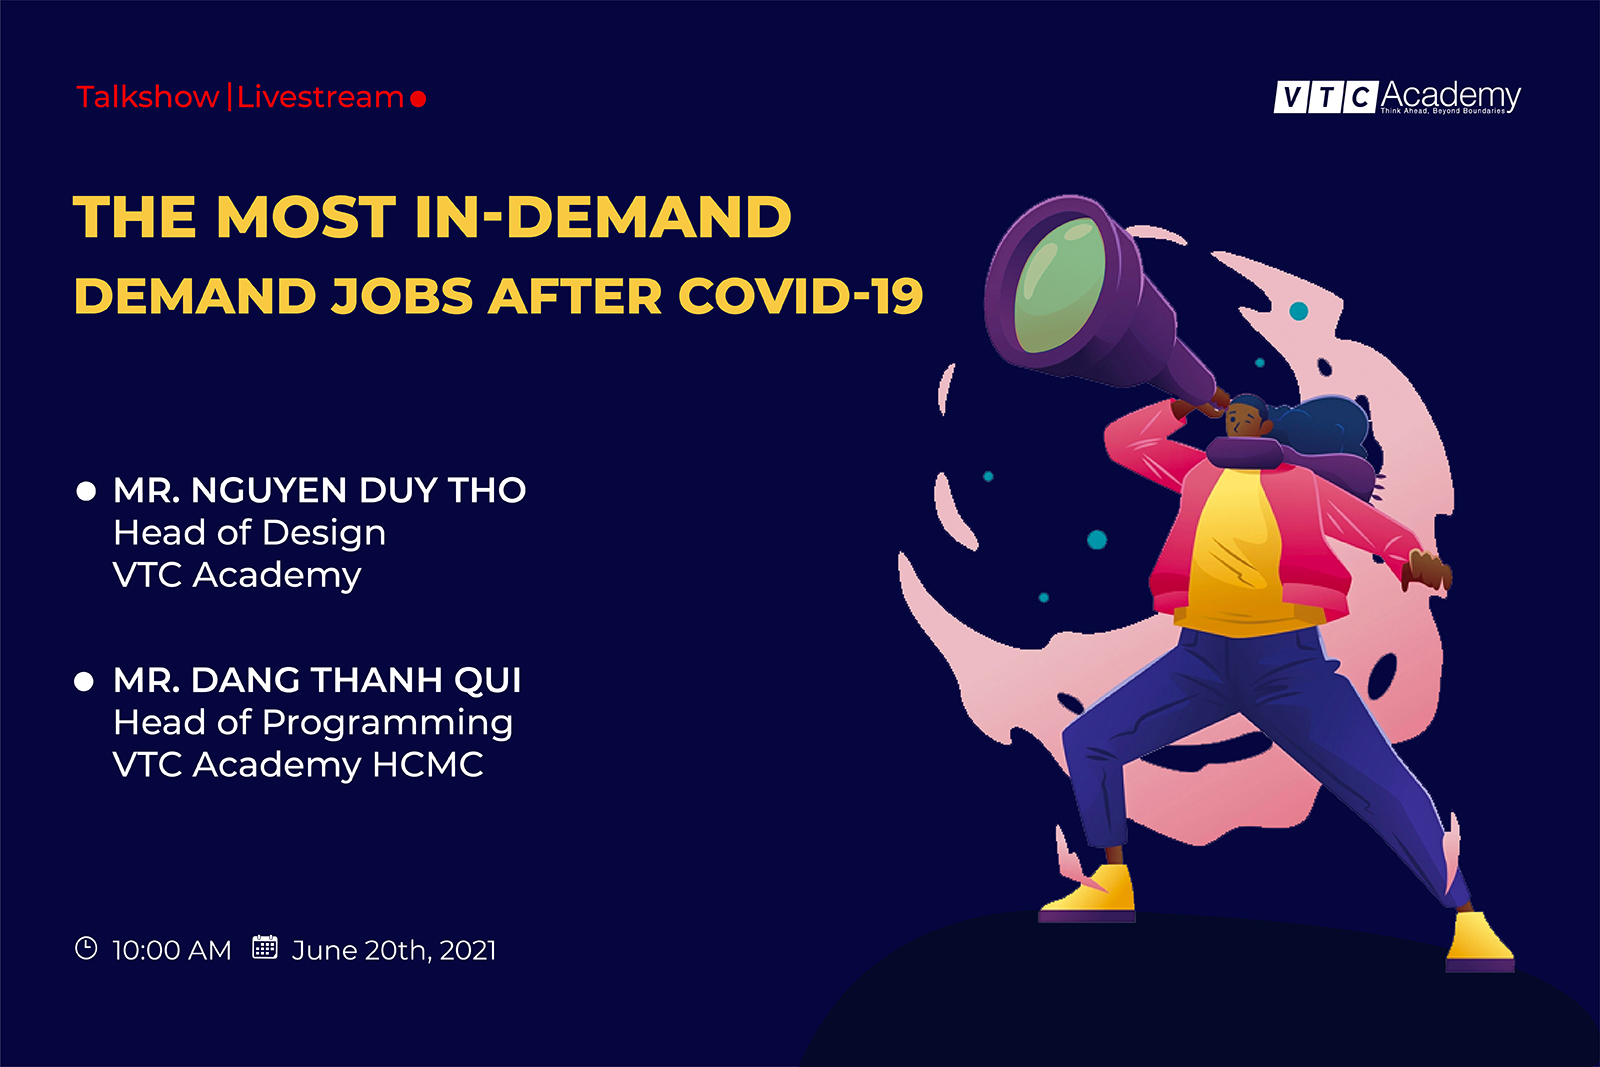 Online Talk Show “The Most In-Demand Jobs after Covid-19”